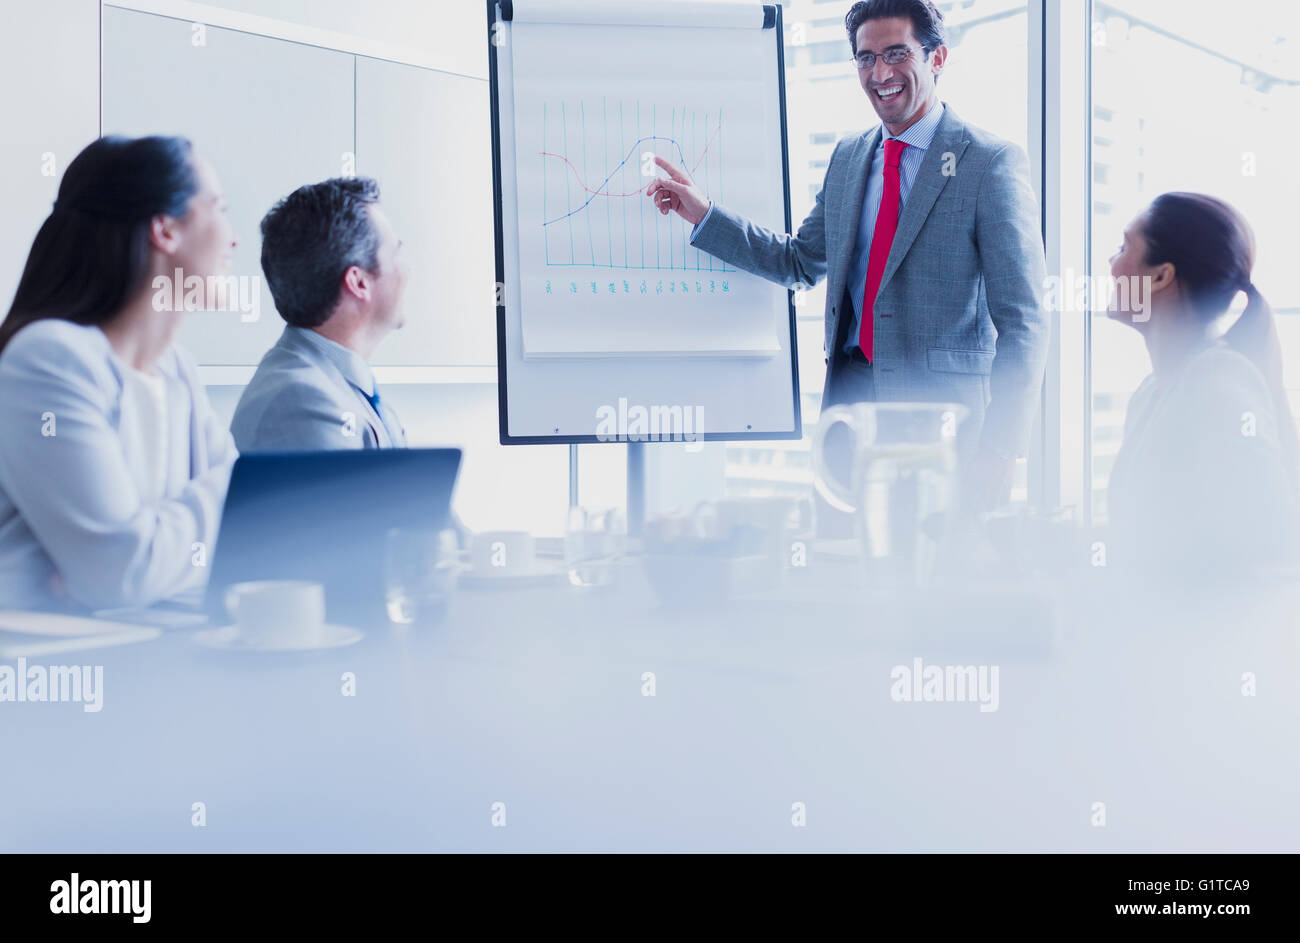 Smiling businessman leading meeting at flip chart in conference room Stock Photo